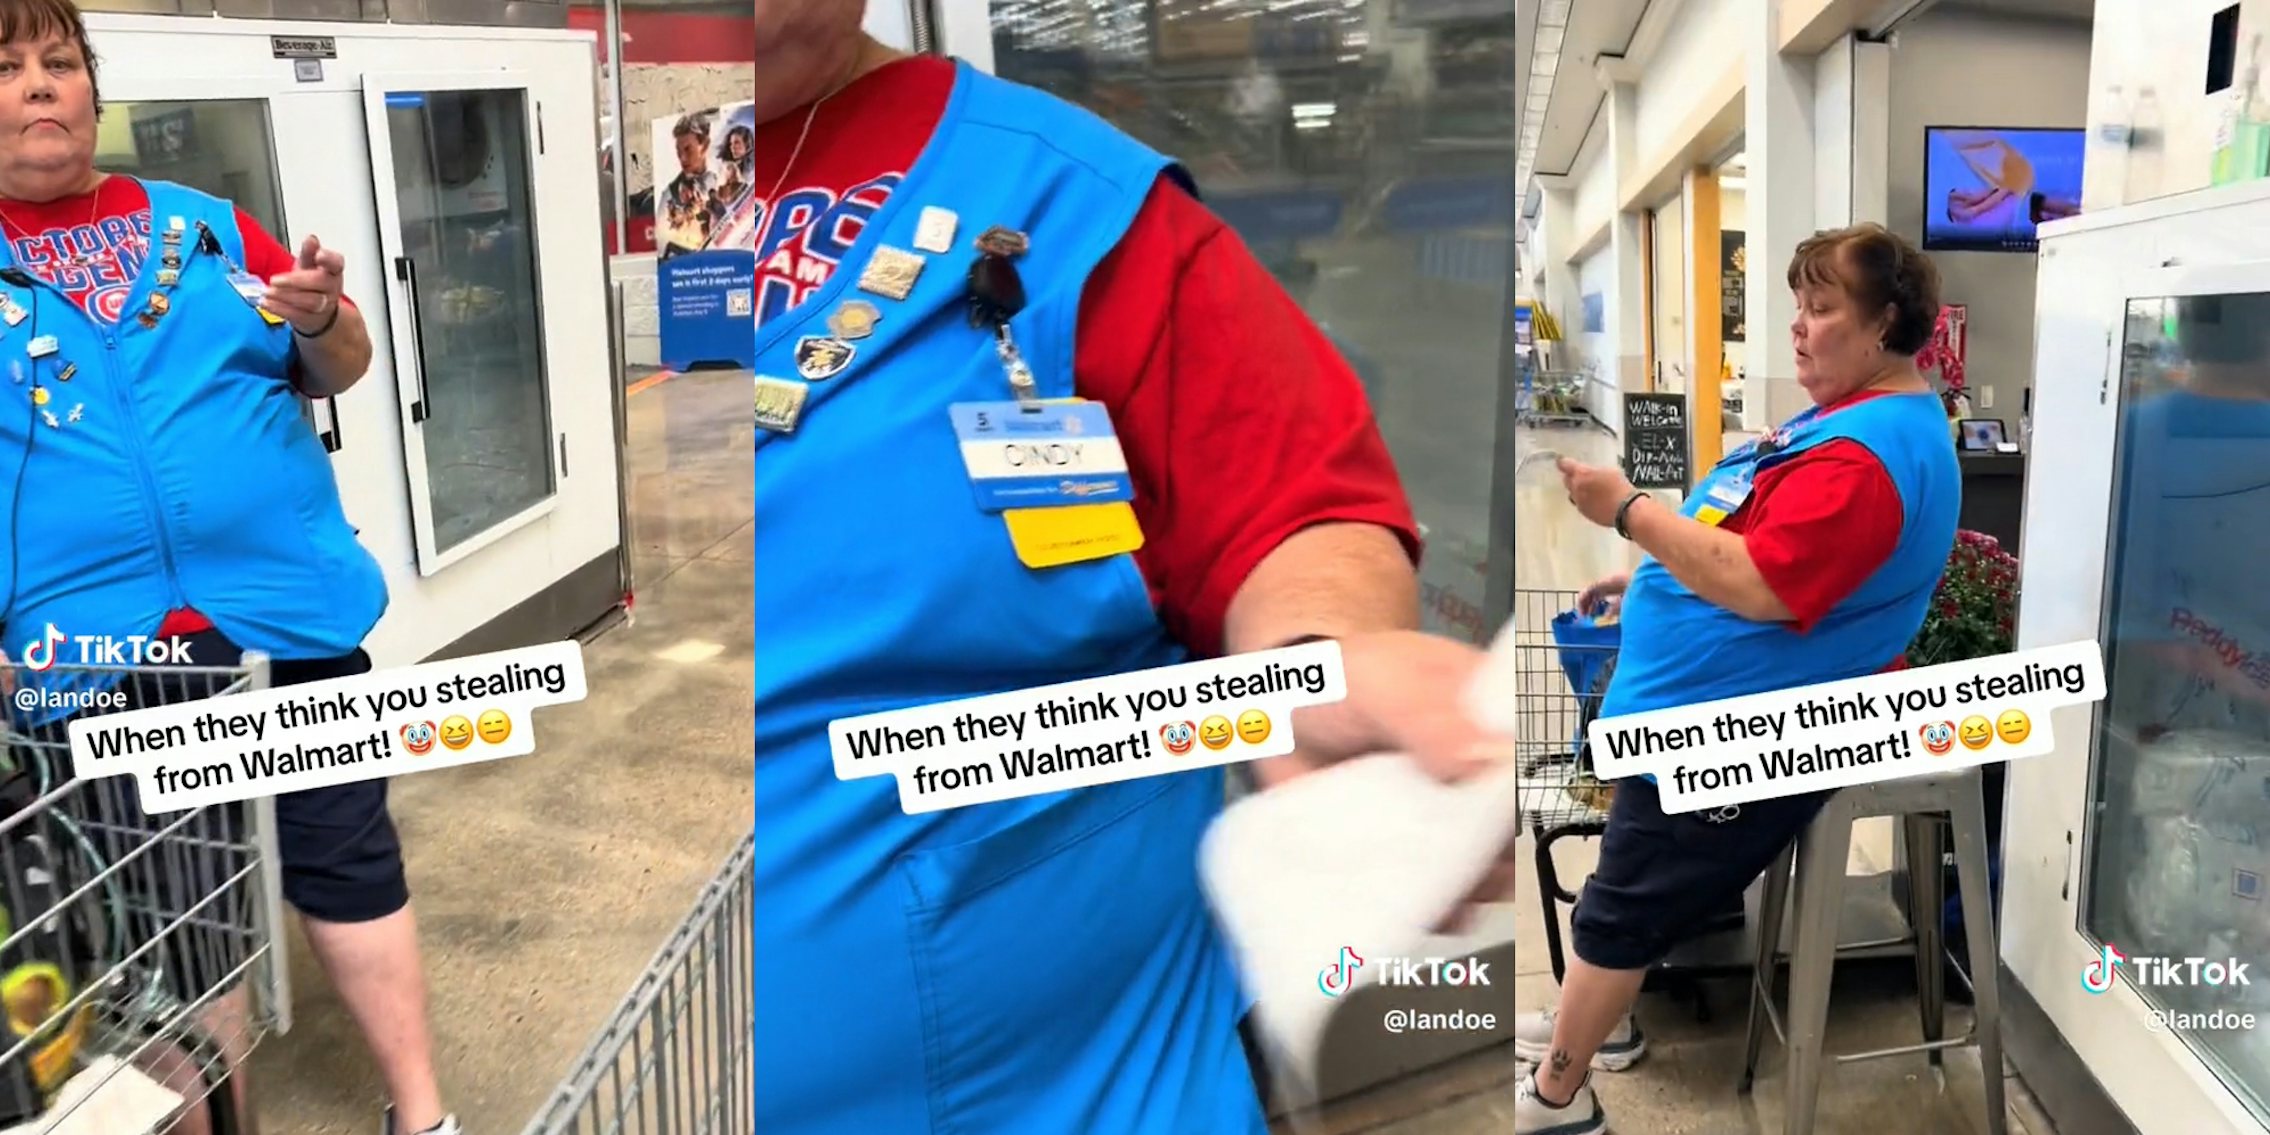 receipt-checker at walmart with caption 'when ythey think you stealing from walmart!'